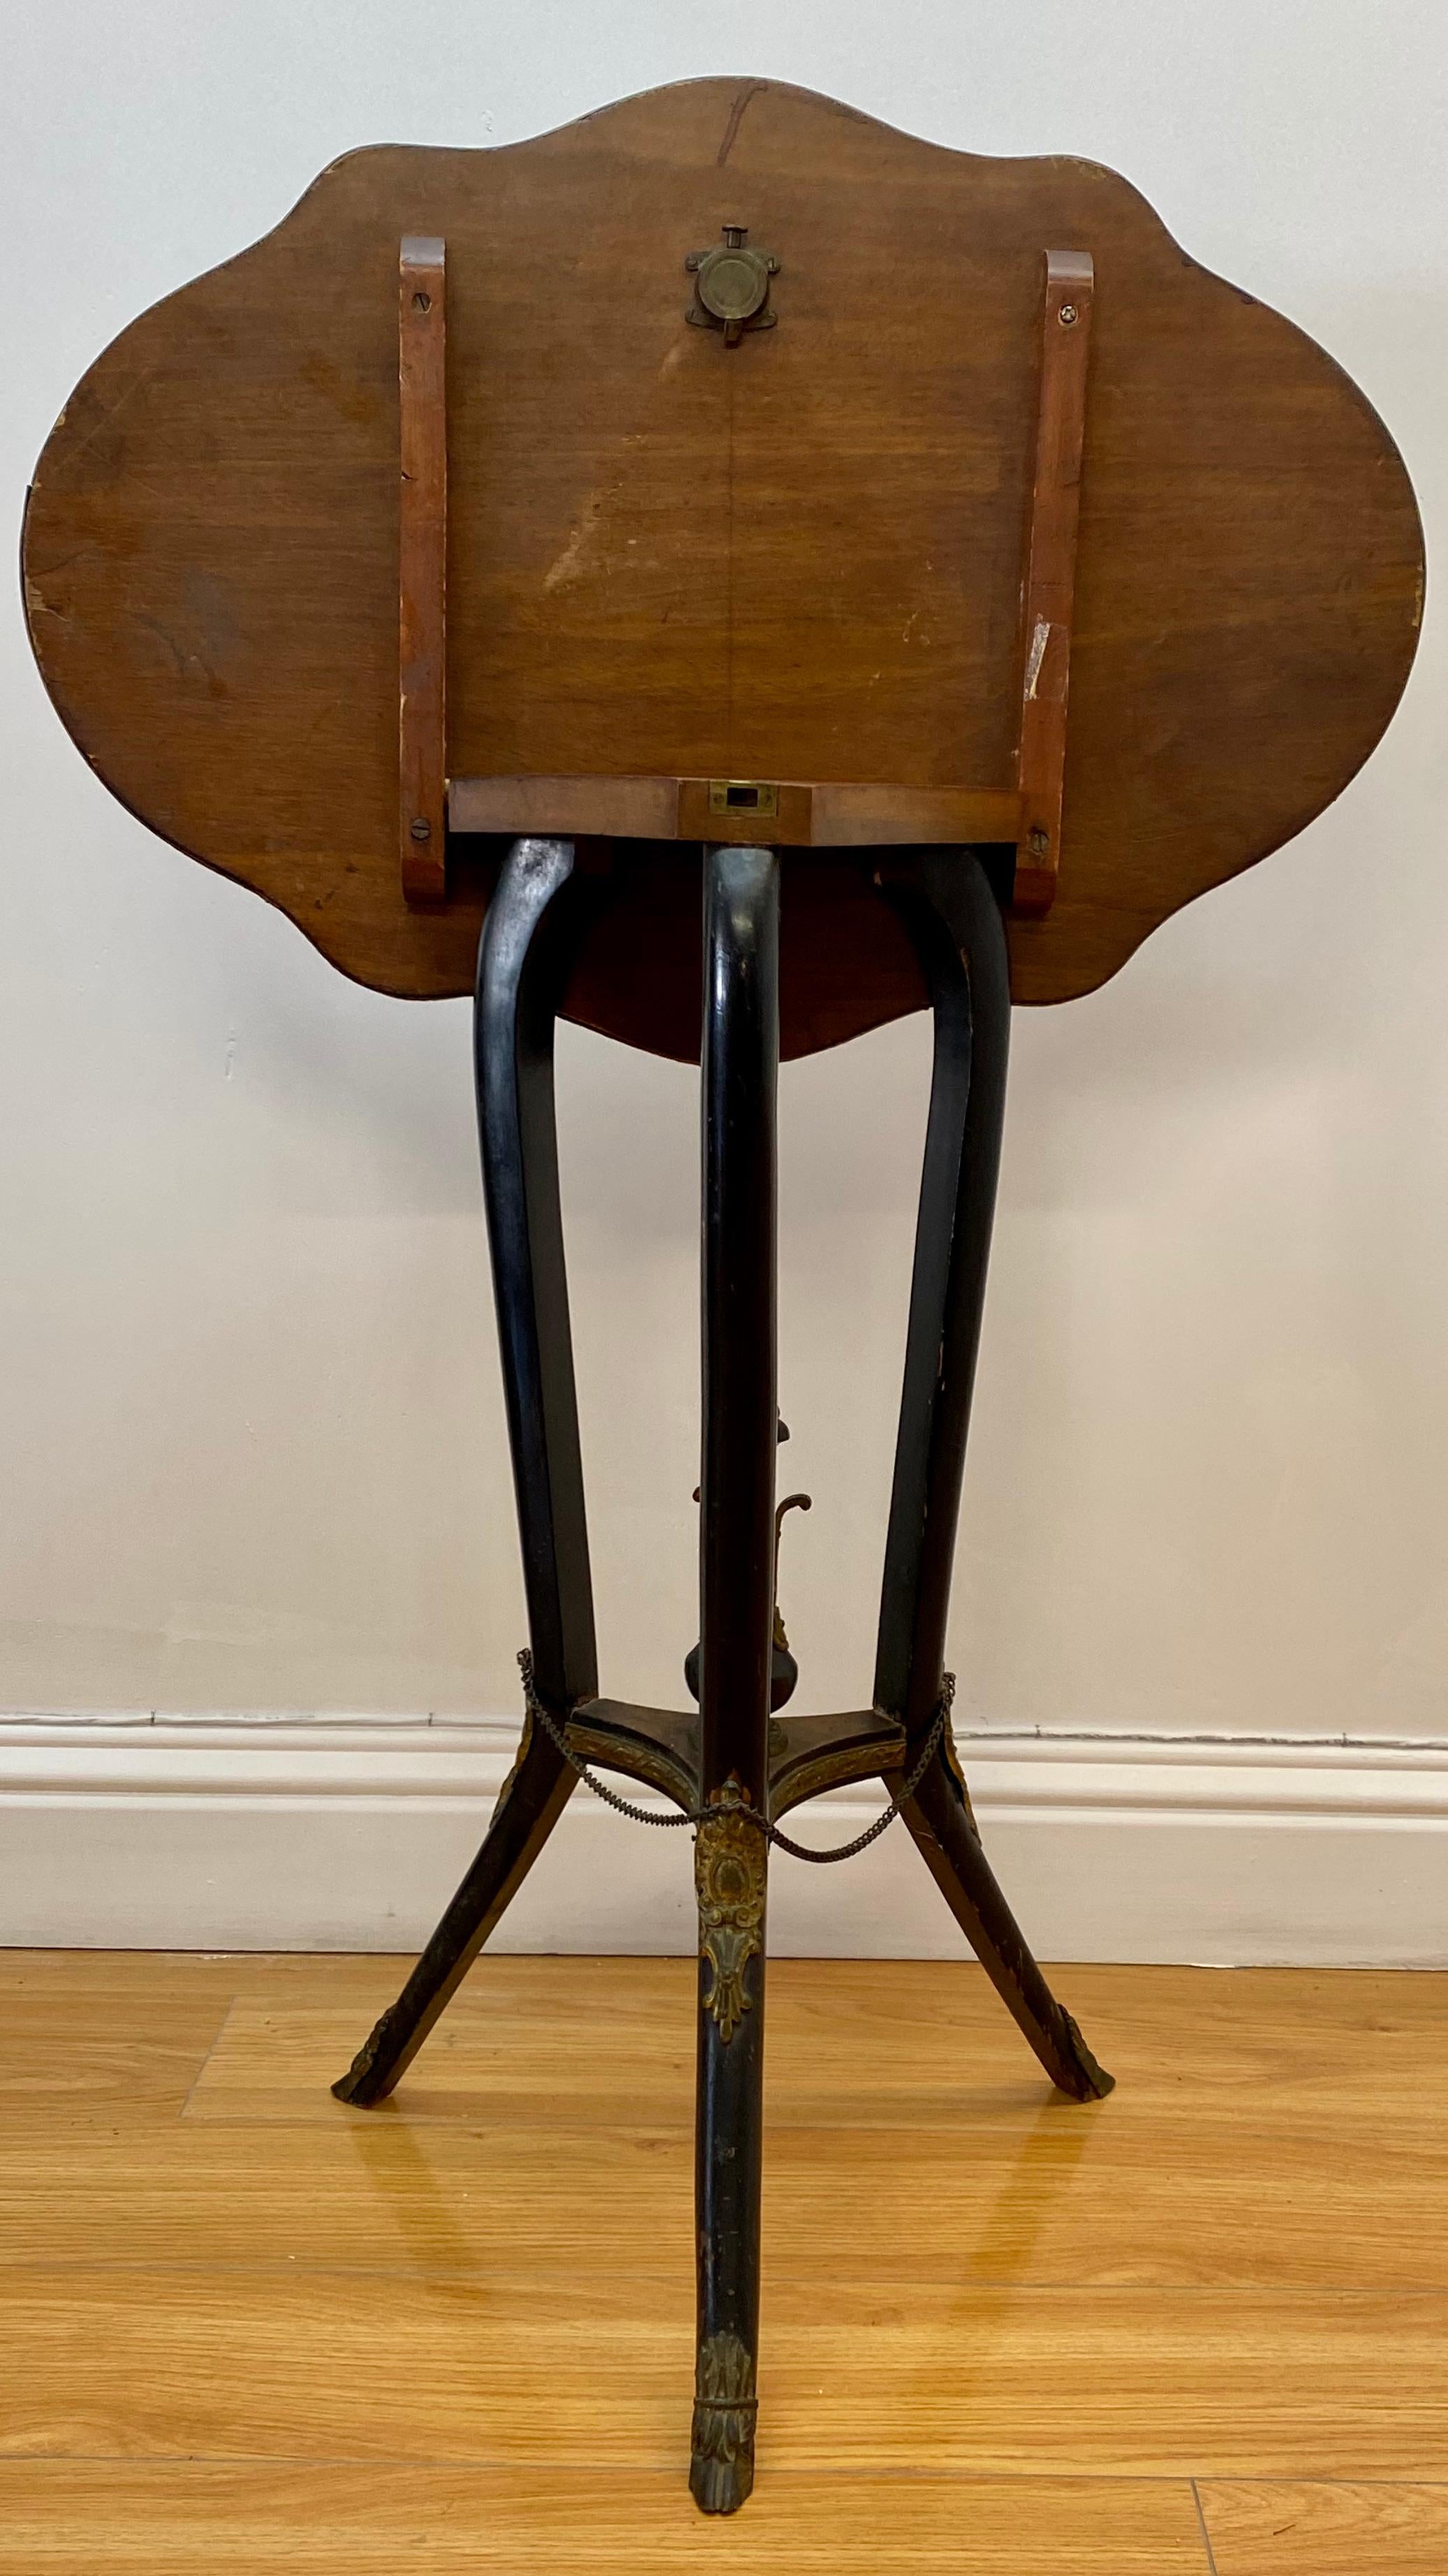 Early 20th Century Victorian European Walnut Inlaid Tilt Top Table c.1900 For Sale 5